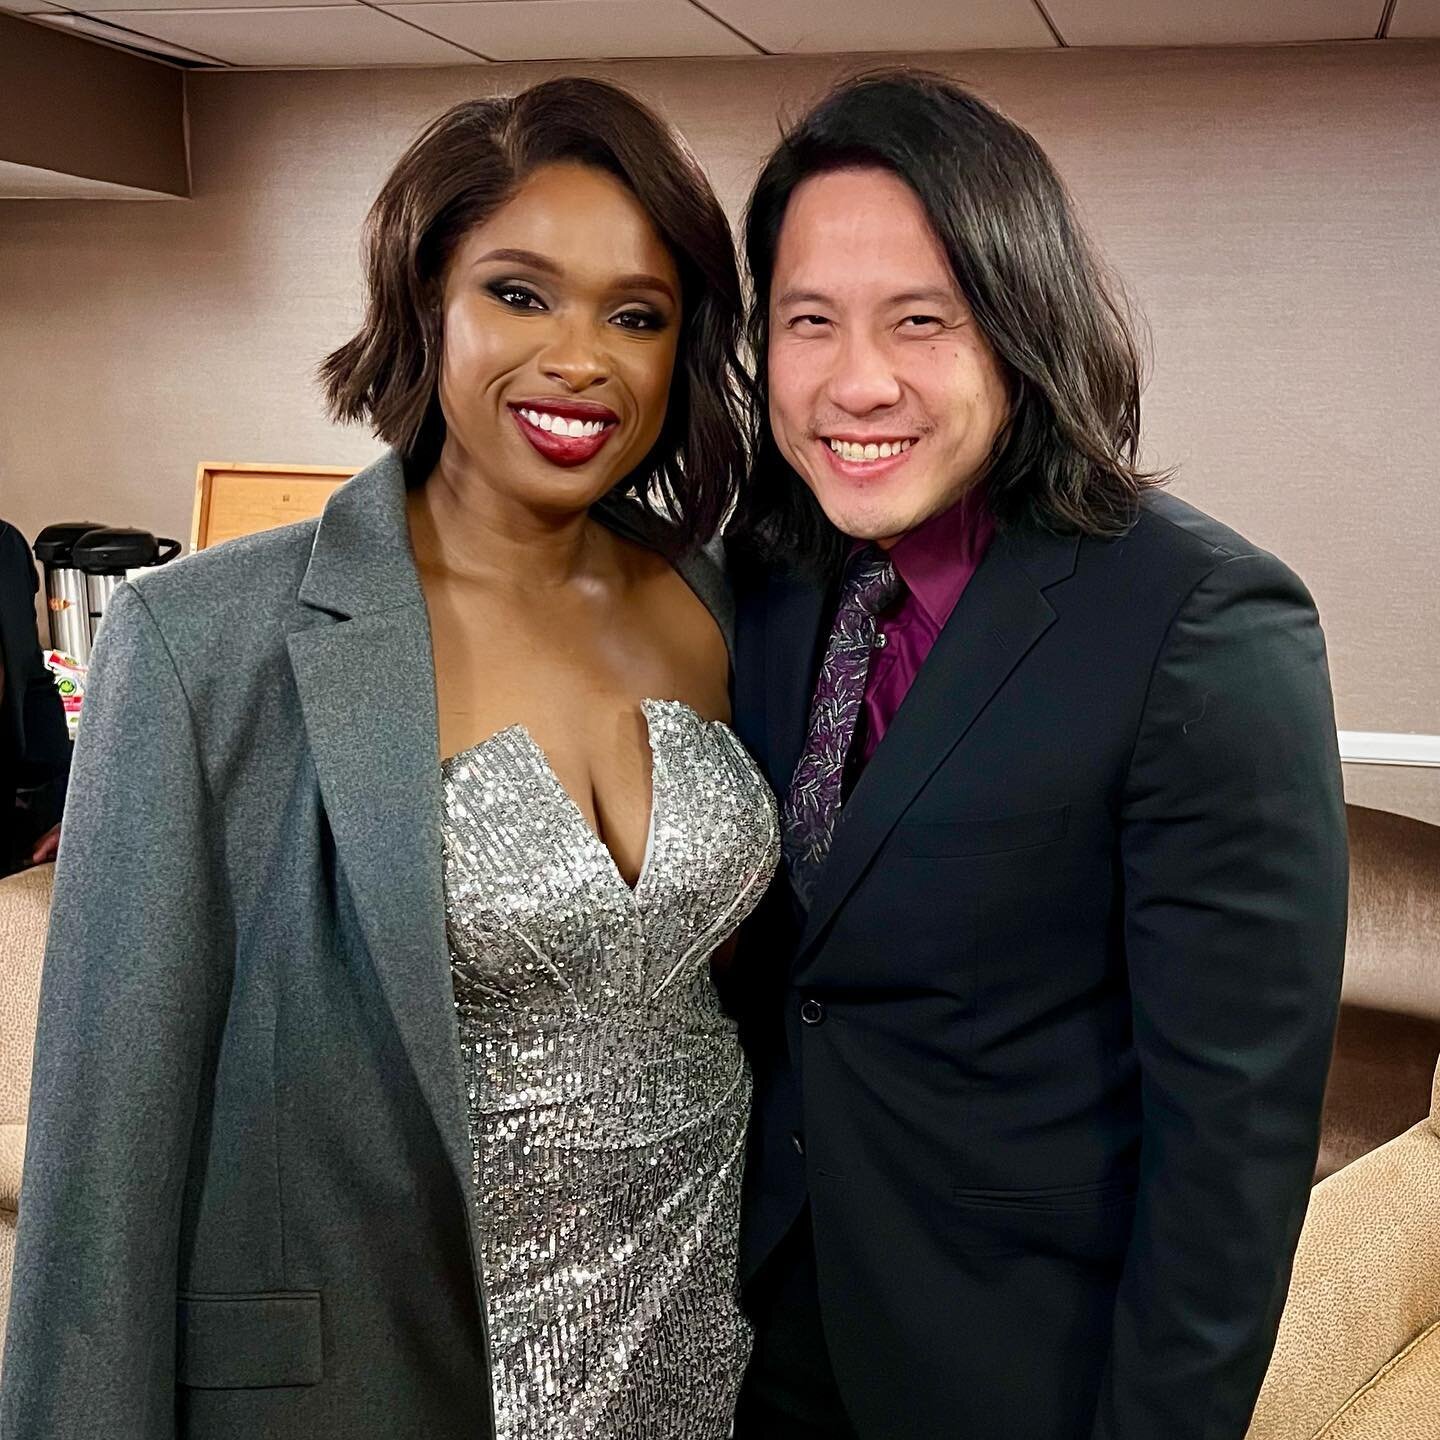 I will always have a place in my heart for @iamjhud . 10 years ago she generously agreed to write me a letter of endorsement for my US green card petition. She&rsquo;s a class act and such a gifted voice. So glad I got to arrange for her incredible p